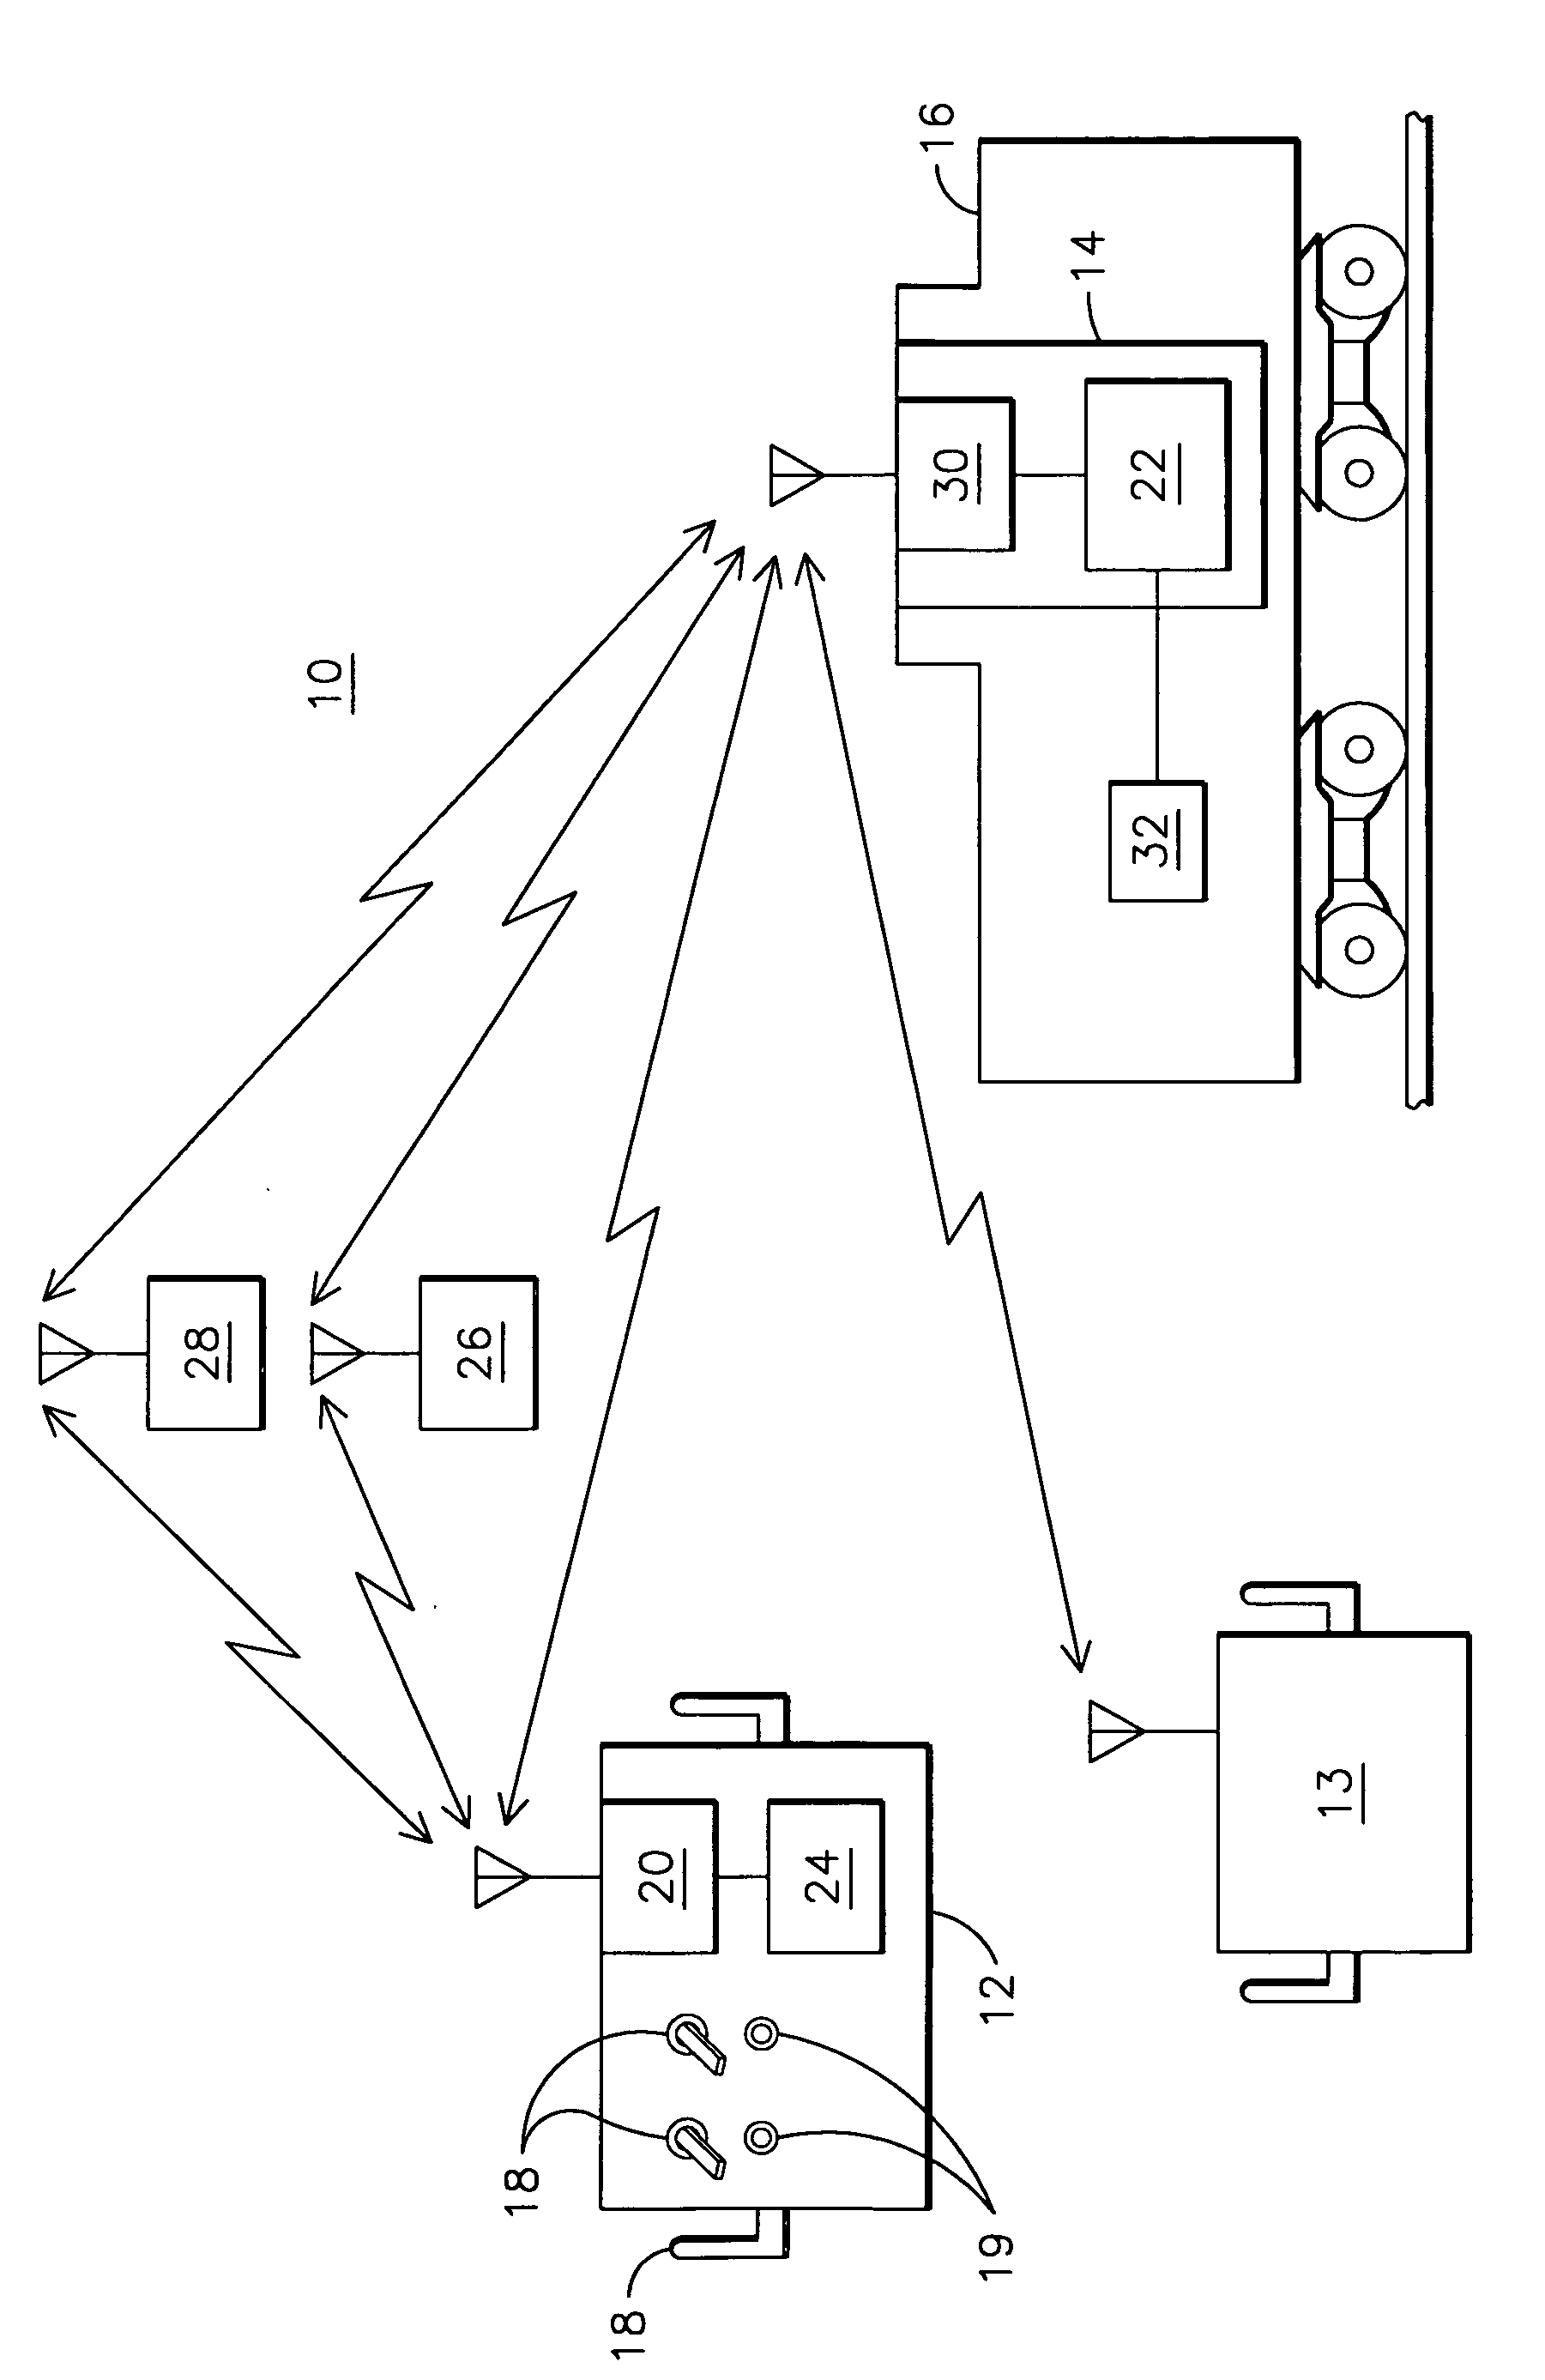 Implicit message sequence numbering for locomotive remote control system wireless communications